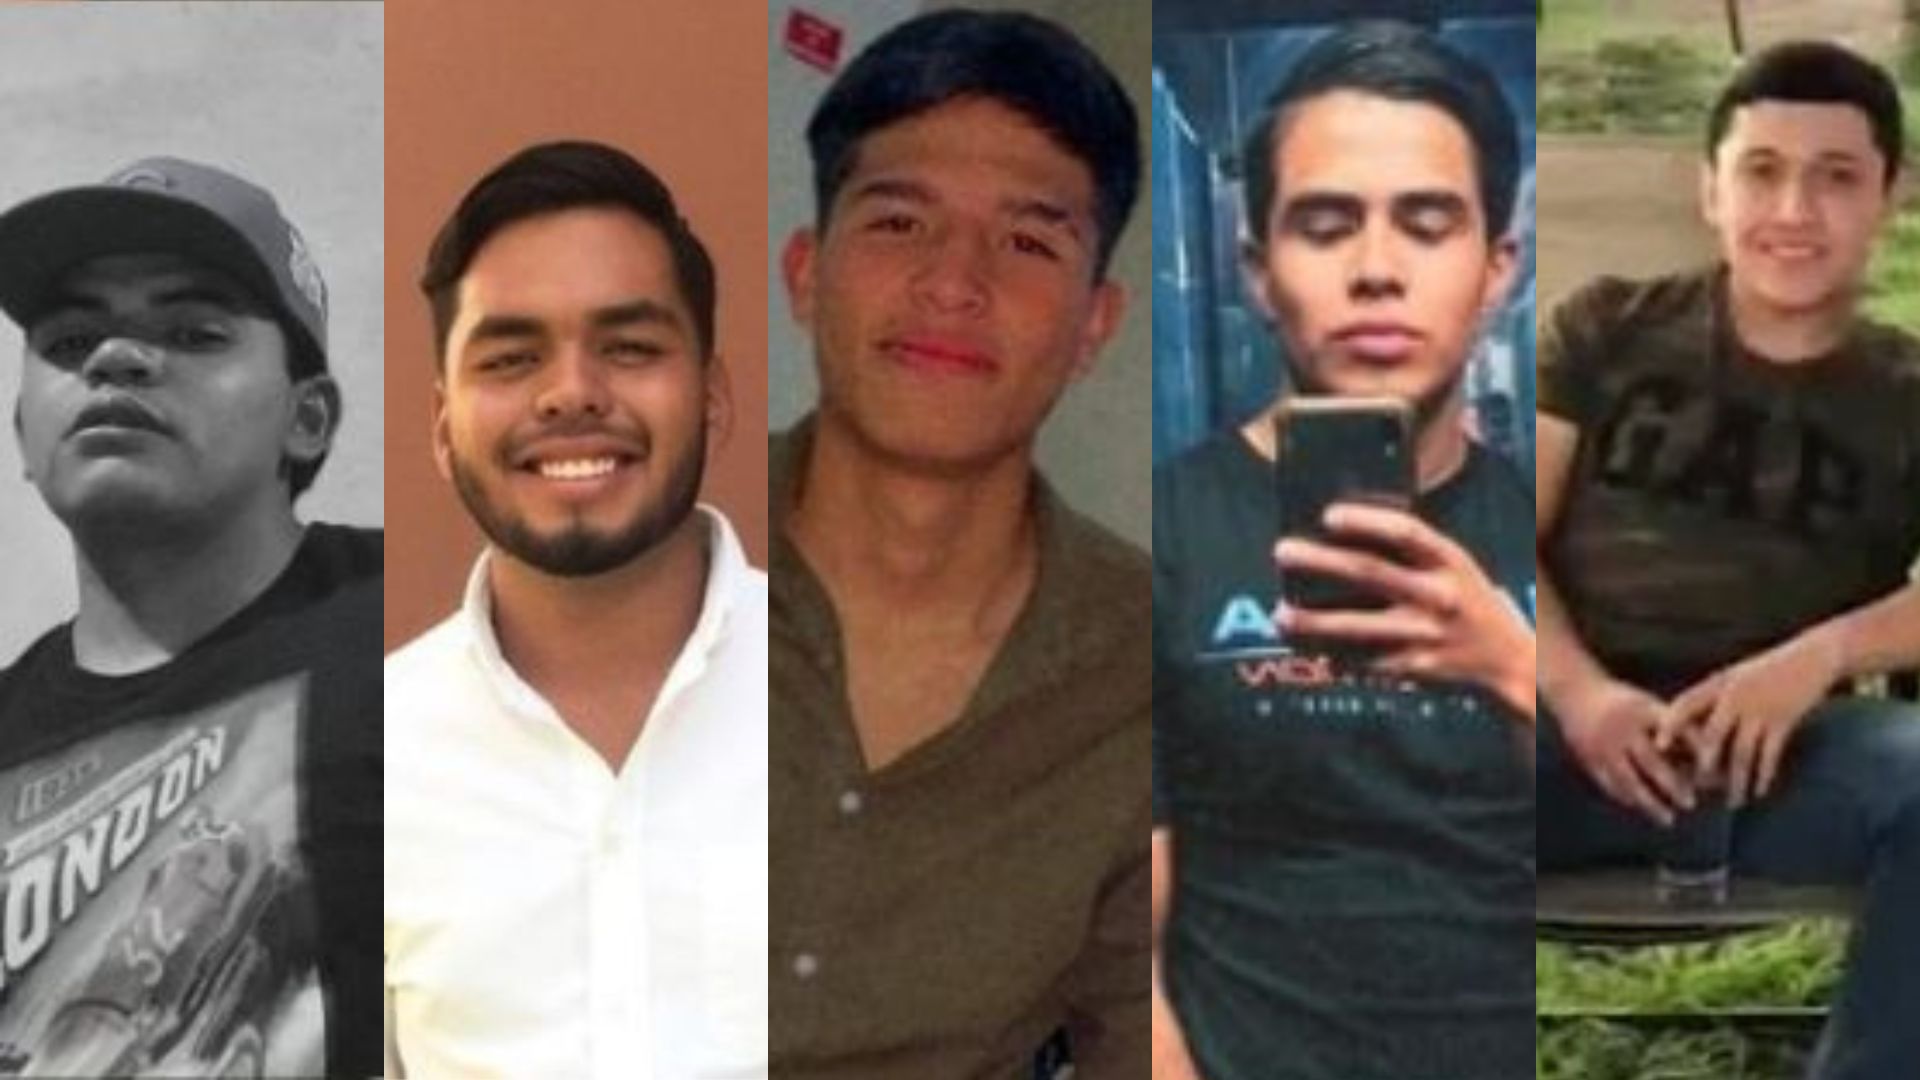 The five young people disappeared on August 11 in Lagos de Moreno (Photo: Twitter: @BENJAMINPENAMX)